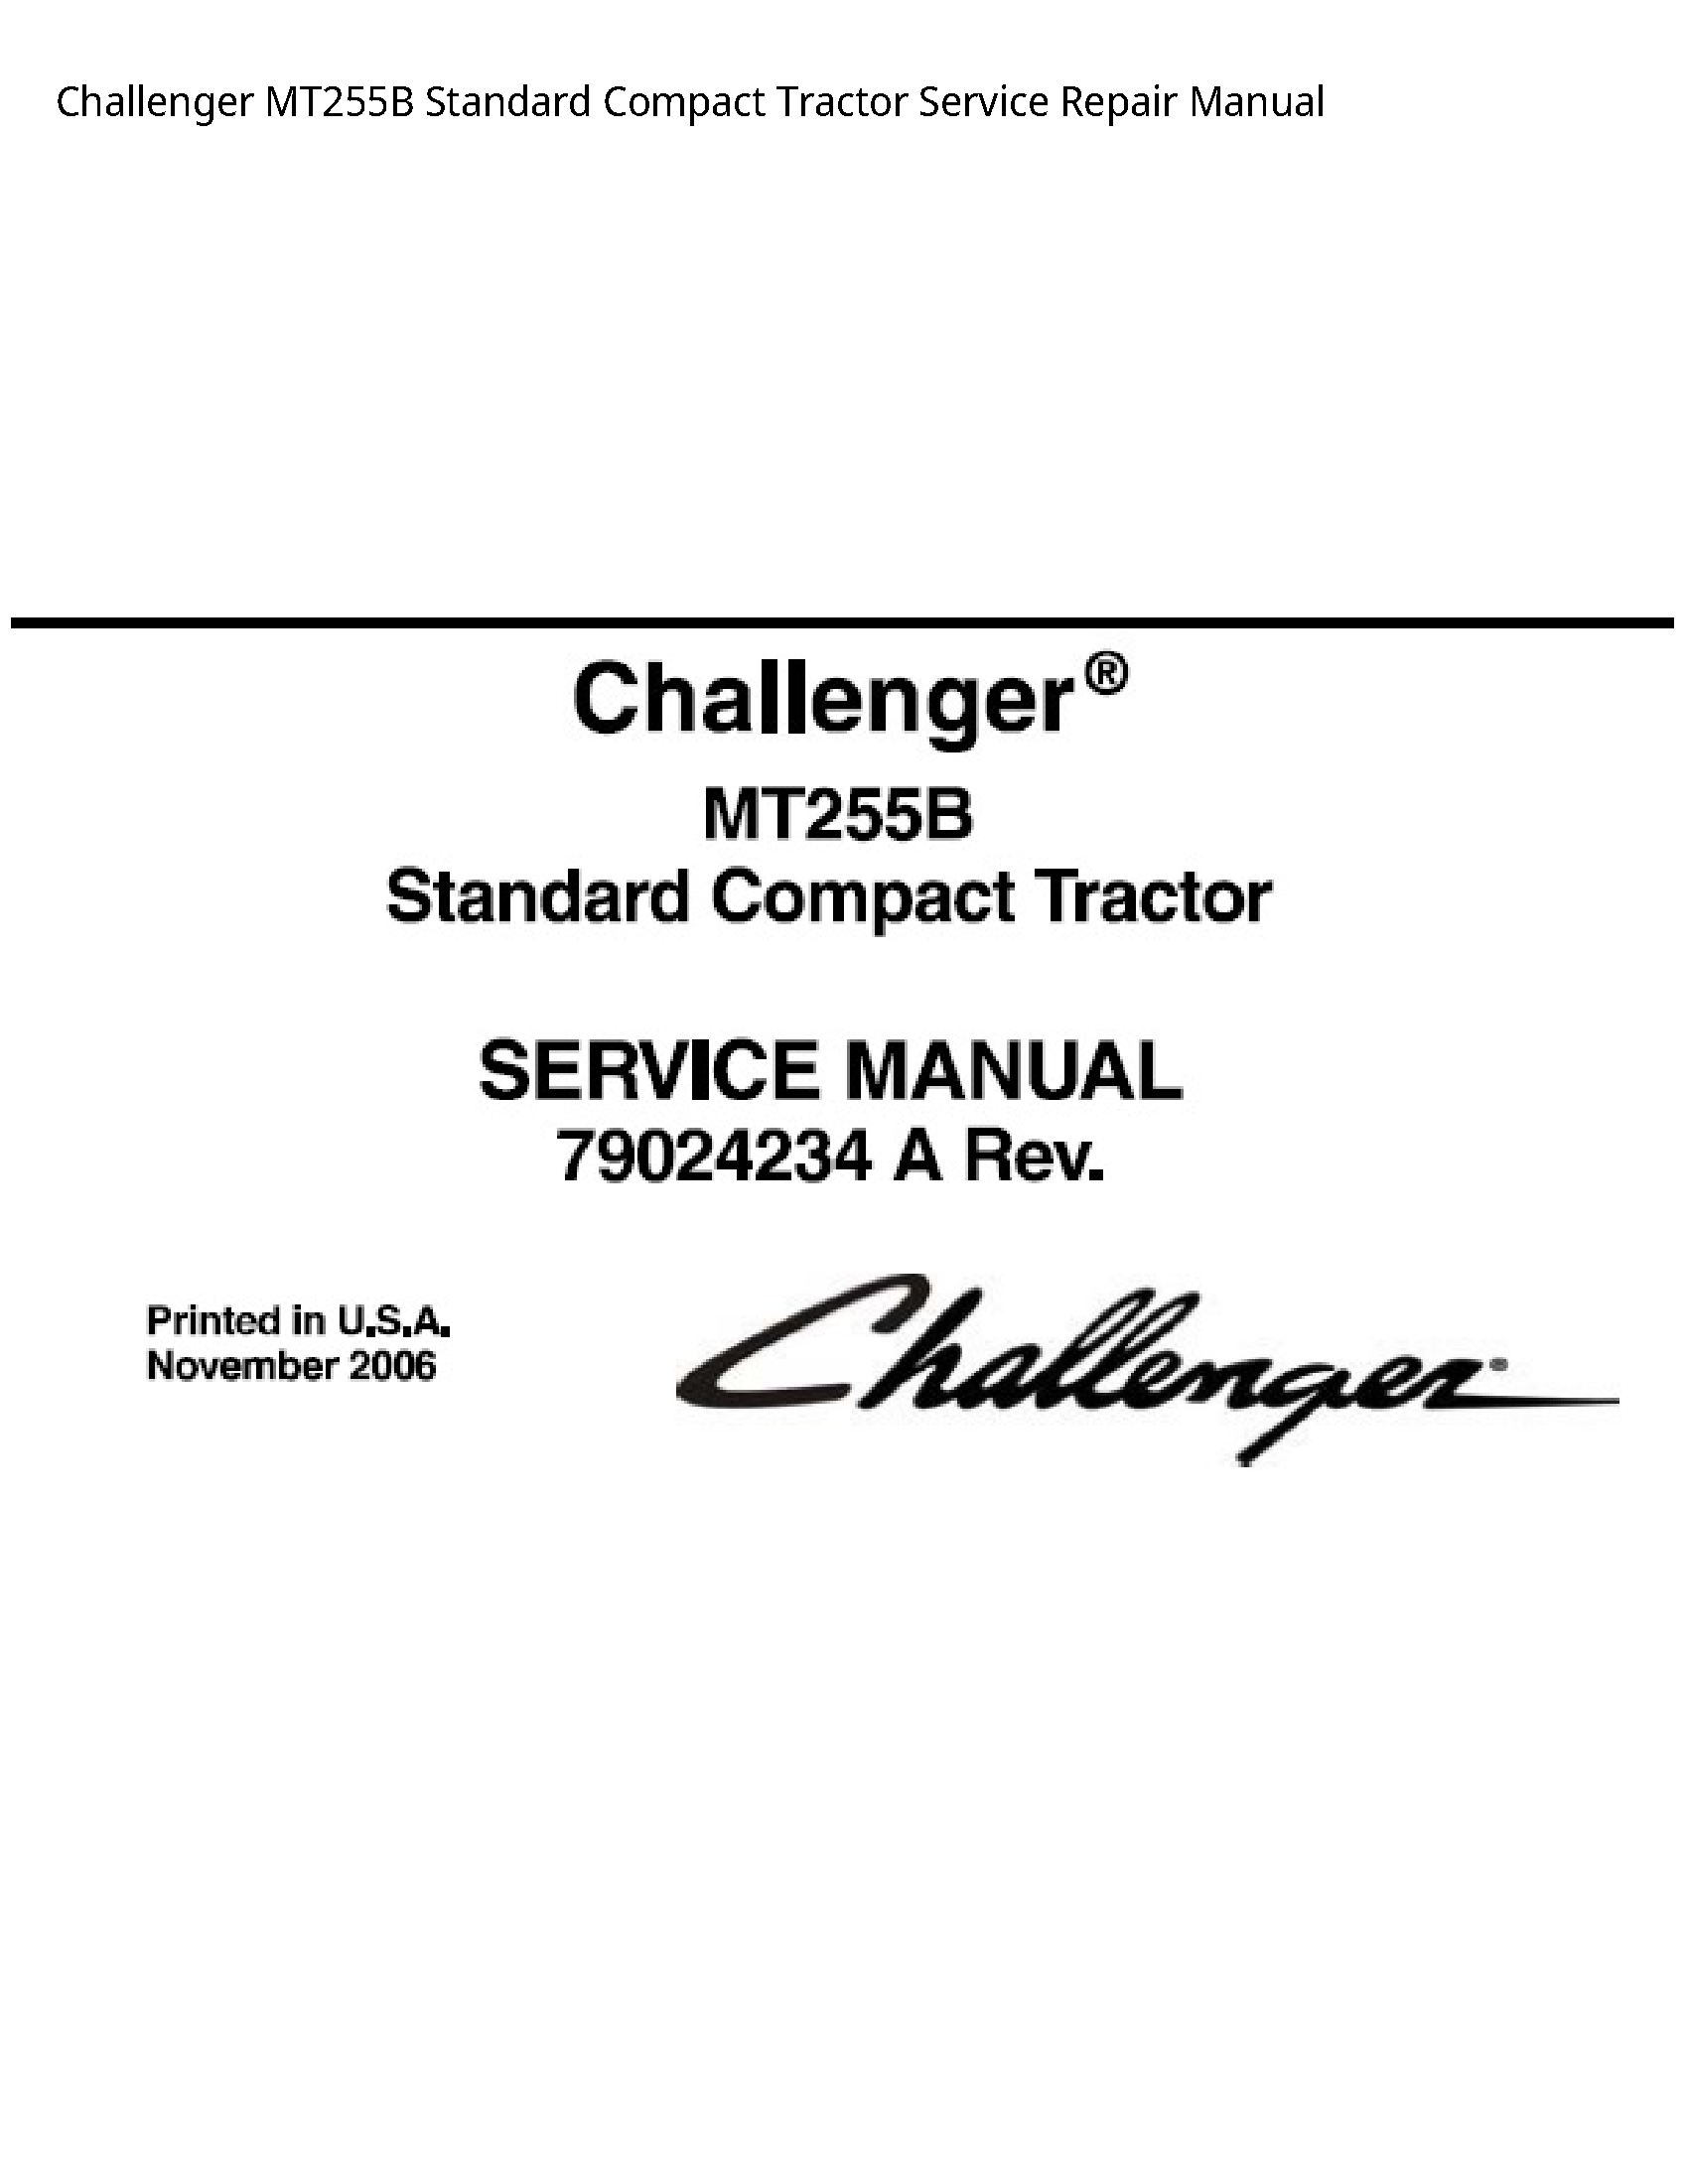 Challenger MT255B Standard Compact Tractor manual